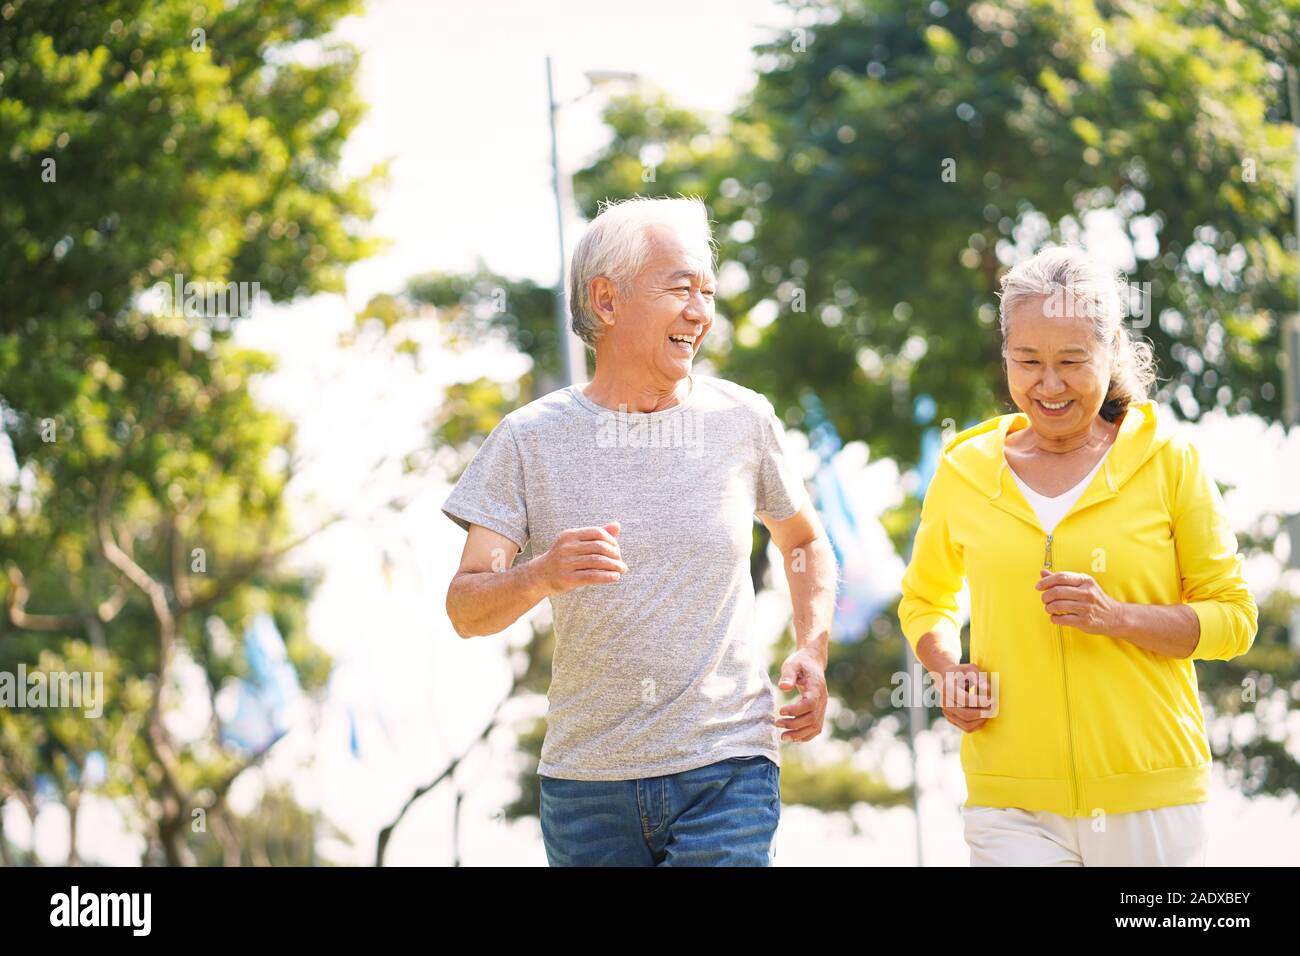 Happy asian senior exercising outdoors in park Banque D'Images